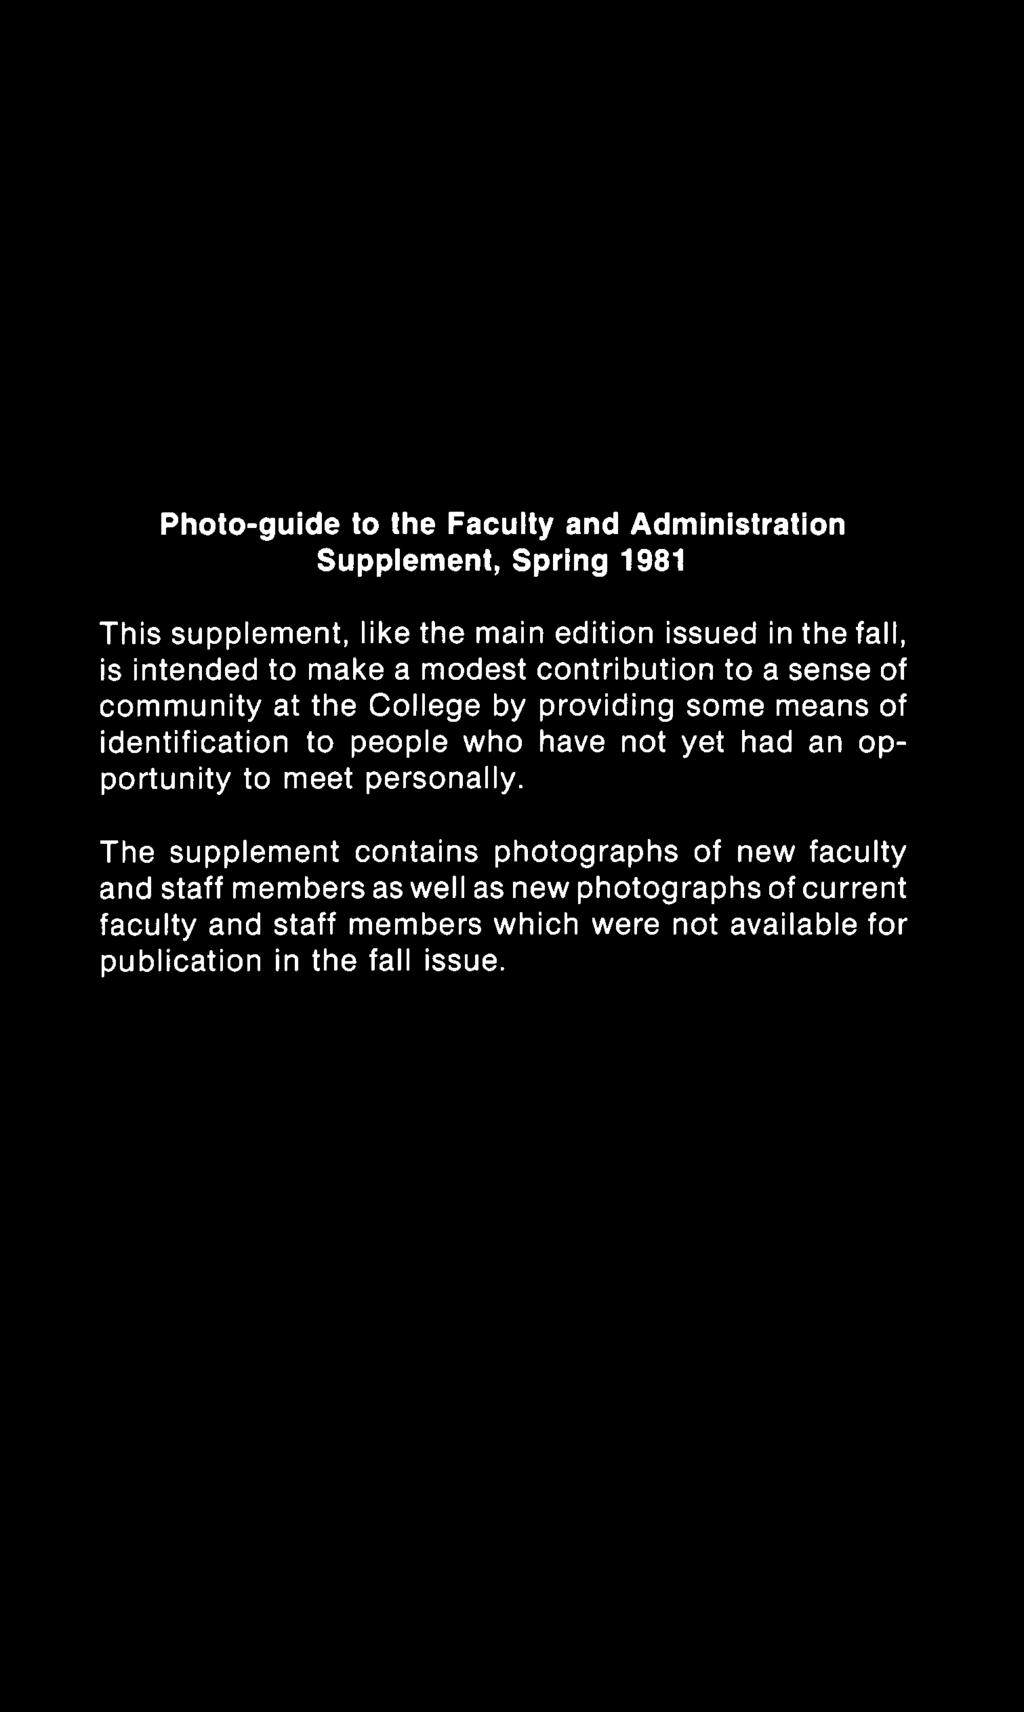 The supplement contains photographs of new faculty and staff members as well as new